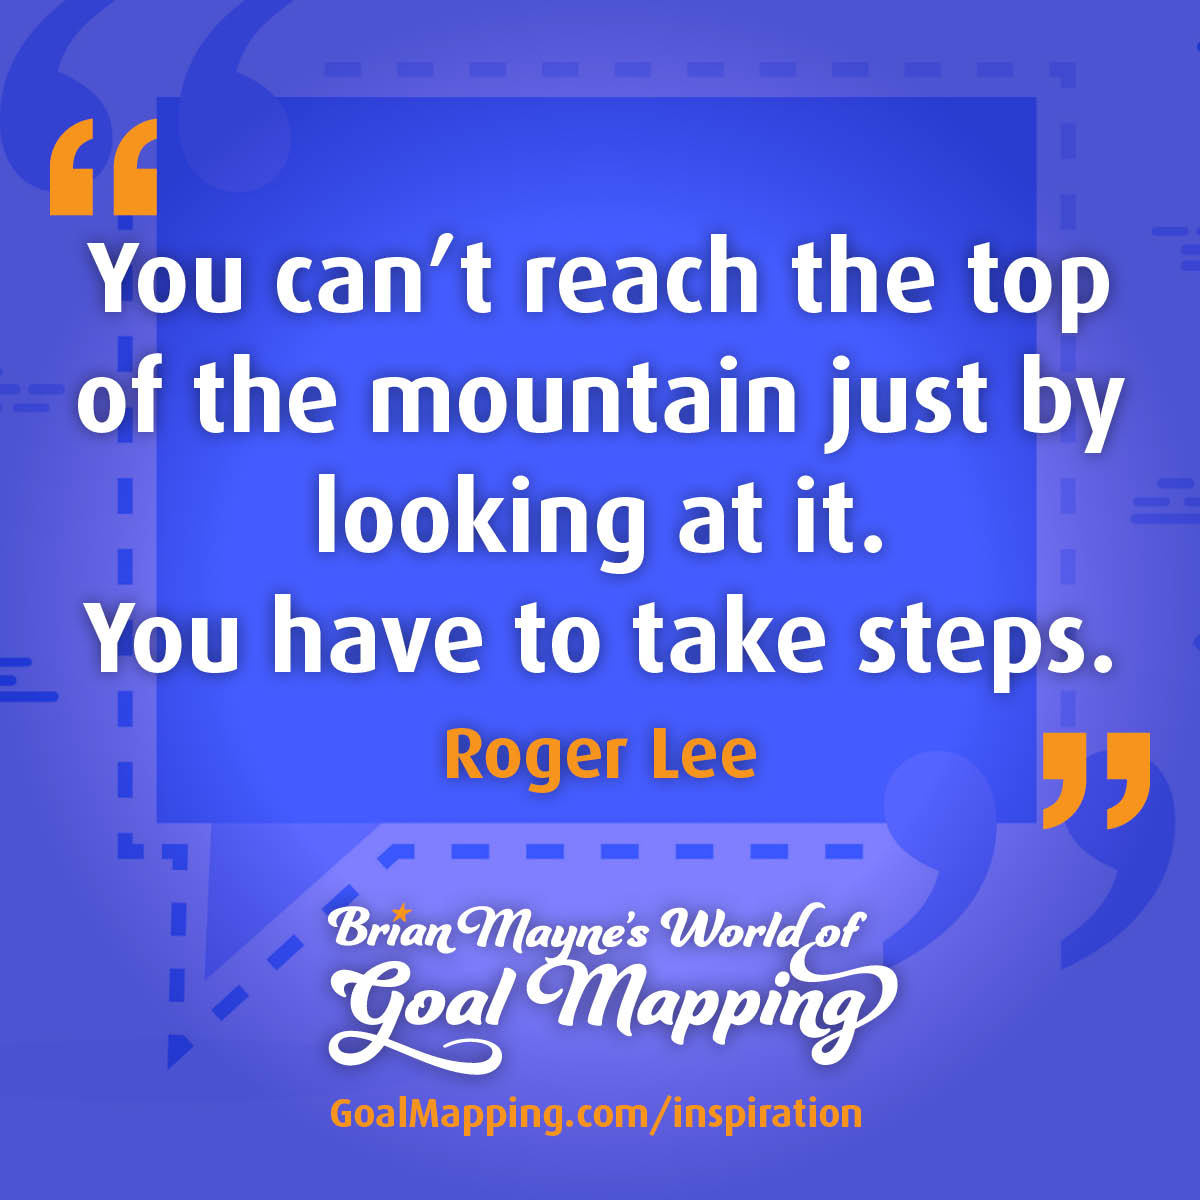 "You can't reach the top of the mountain just by looking at it. You have to take steps." Roger Lee